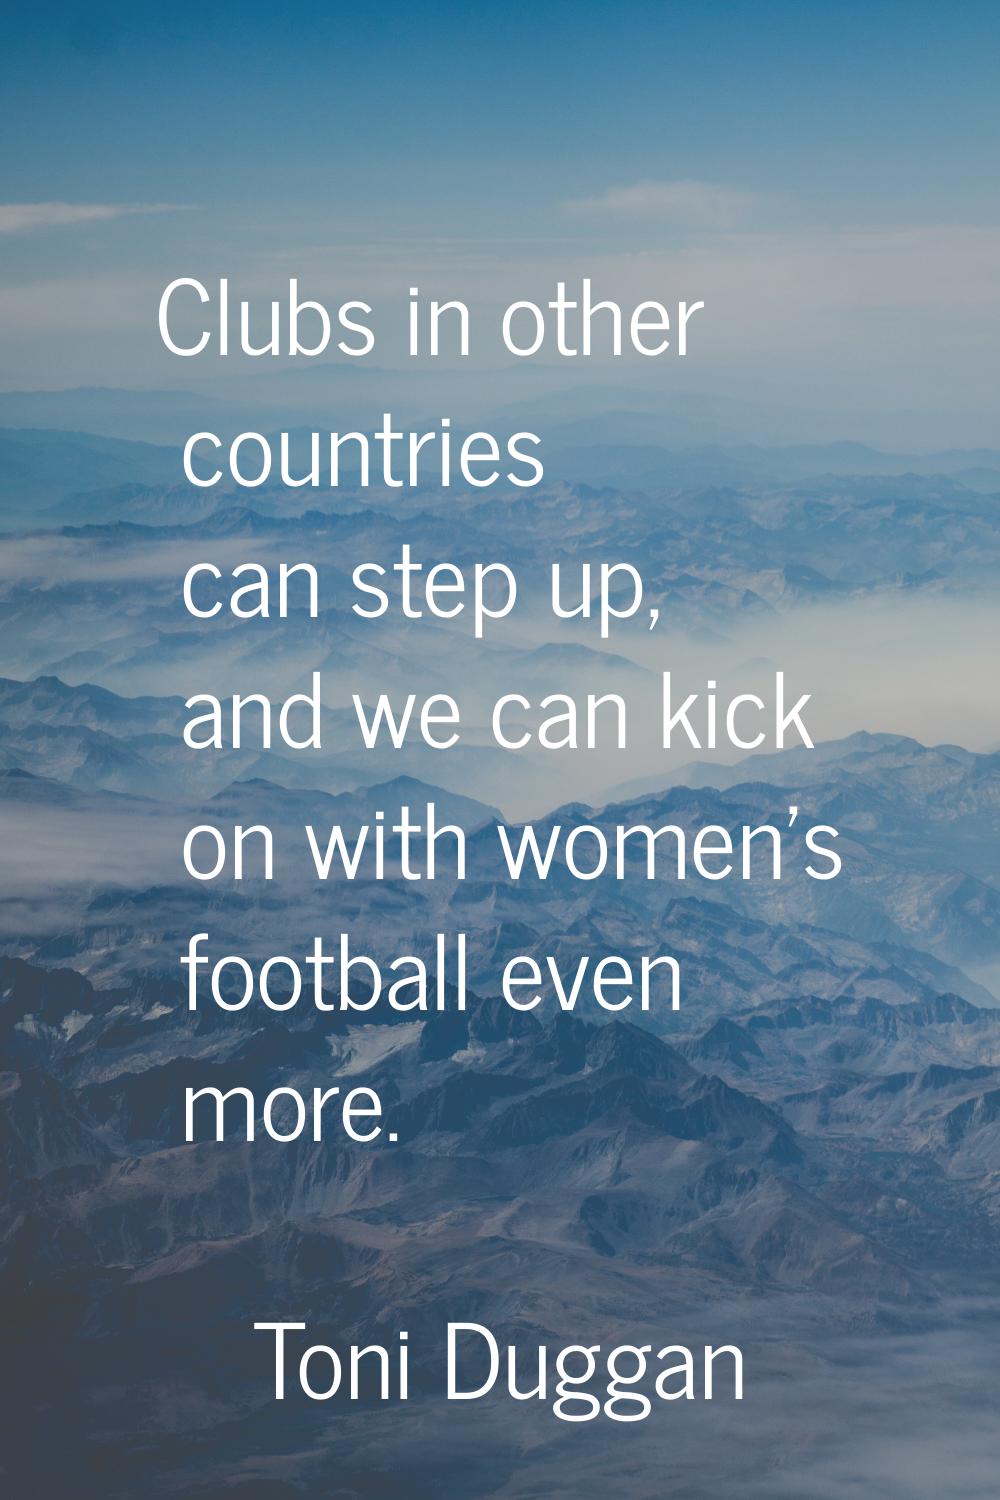 Clubs in other countries can step up, and we can kick on with women's football even more.